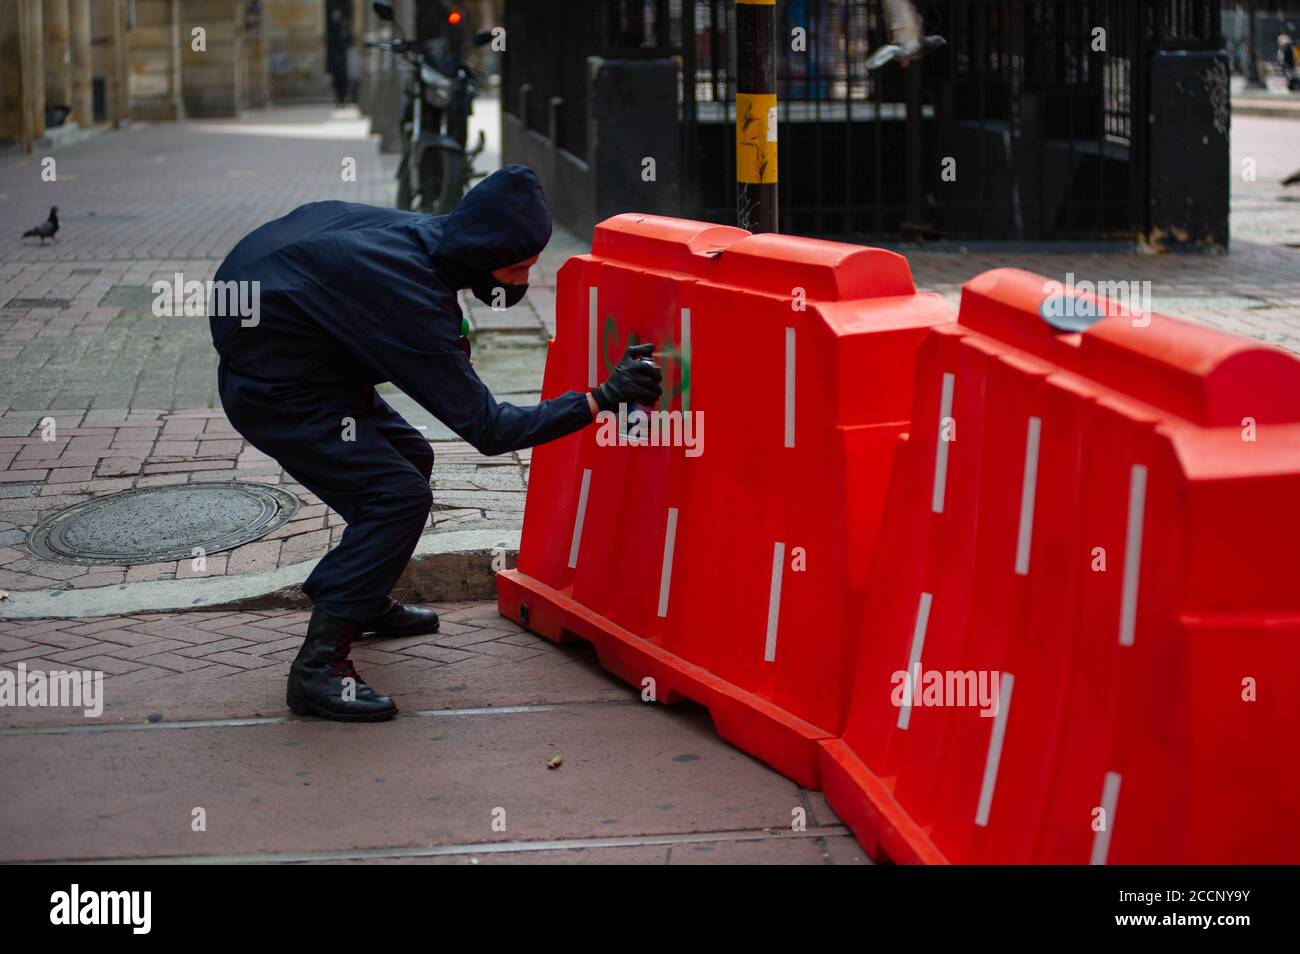 Bogota, Colombia. 23rd Aug, 2020. A demonstrator pains a graffiti on a safety barrier during the Memorial Demonstrations for Dilan Cruz on August 23 2020 in Bogota, Colombia. Dilan Cruz was a high school student who was shot by a riot police officer during the 2019 national strike in Colombia, on the demonstrations that took place on november 23 2019. (Photo by Sebastian Barros Salamanca/Pacific Press) Credit: Pacific Press Media Production Corp./Alamy Live News Stock Photo